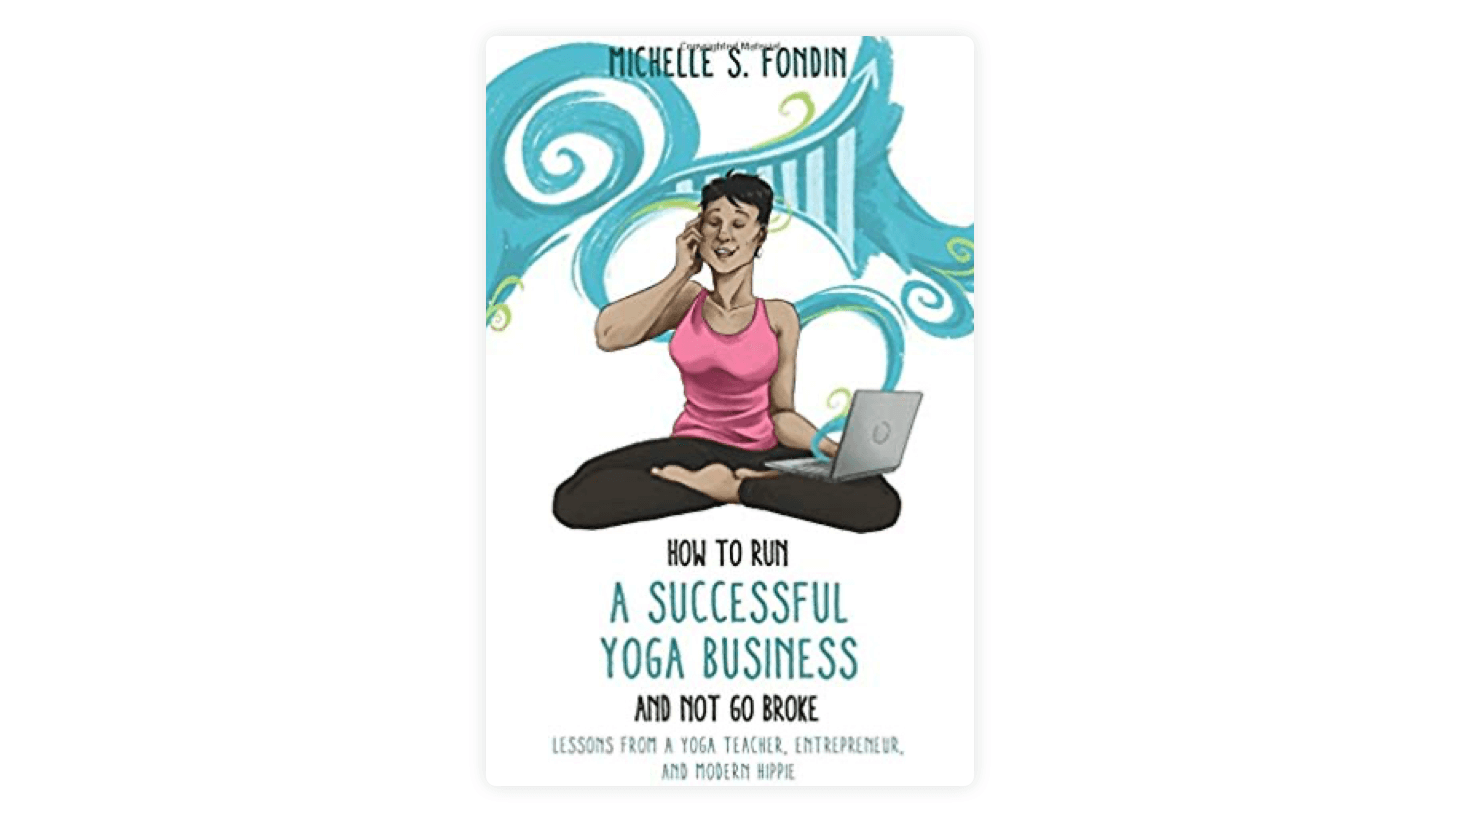 Clear the mysteries of your Yoga Practice and Business with my Top